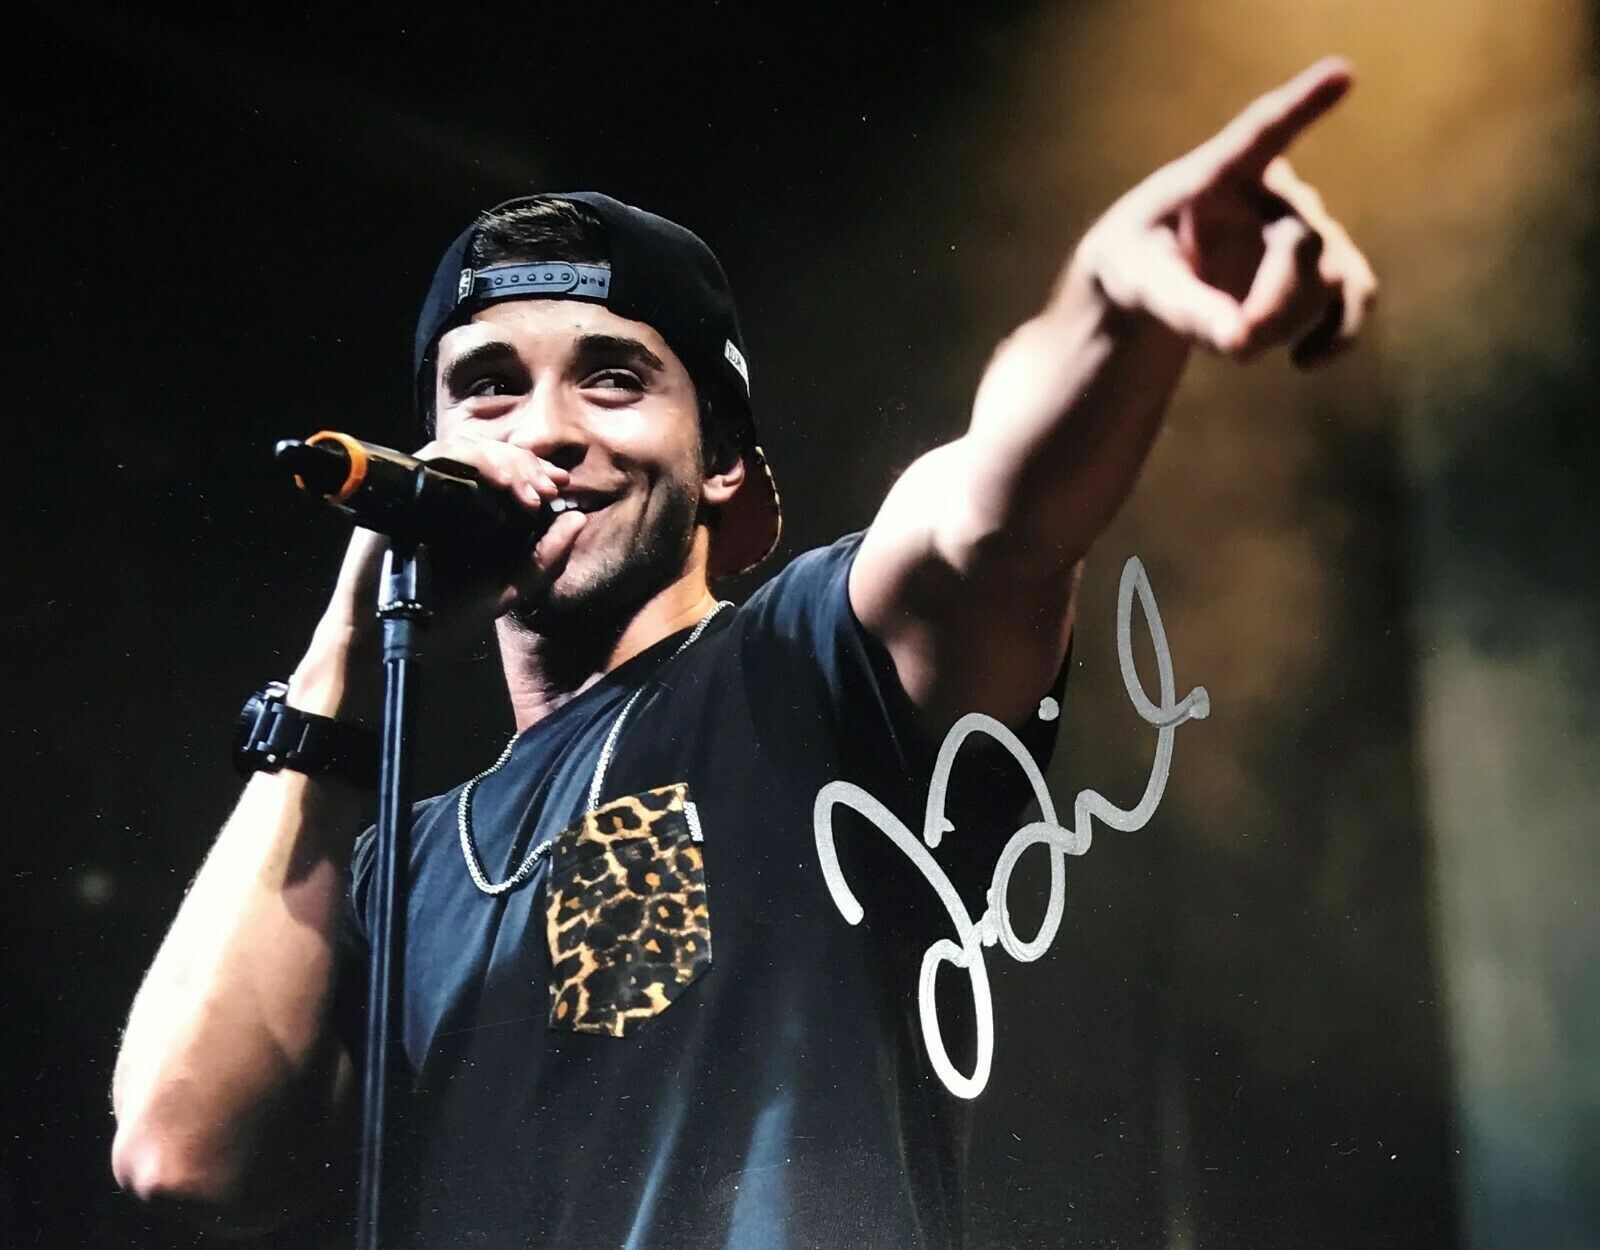 Jake Miller Autographed Signed 8x10 Photo Poster painting REPRINT